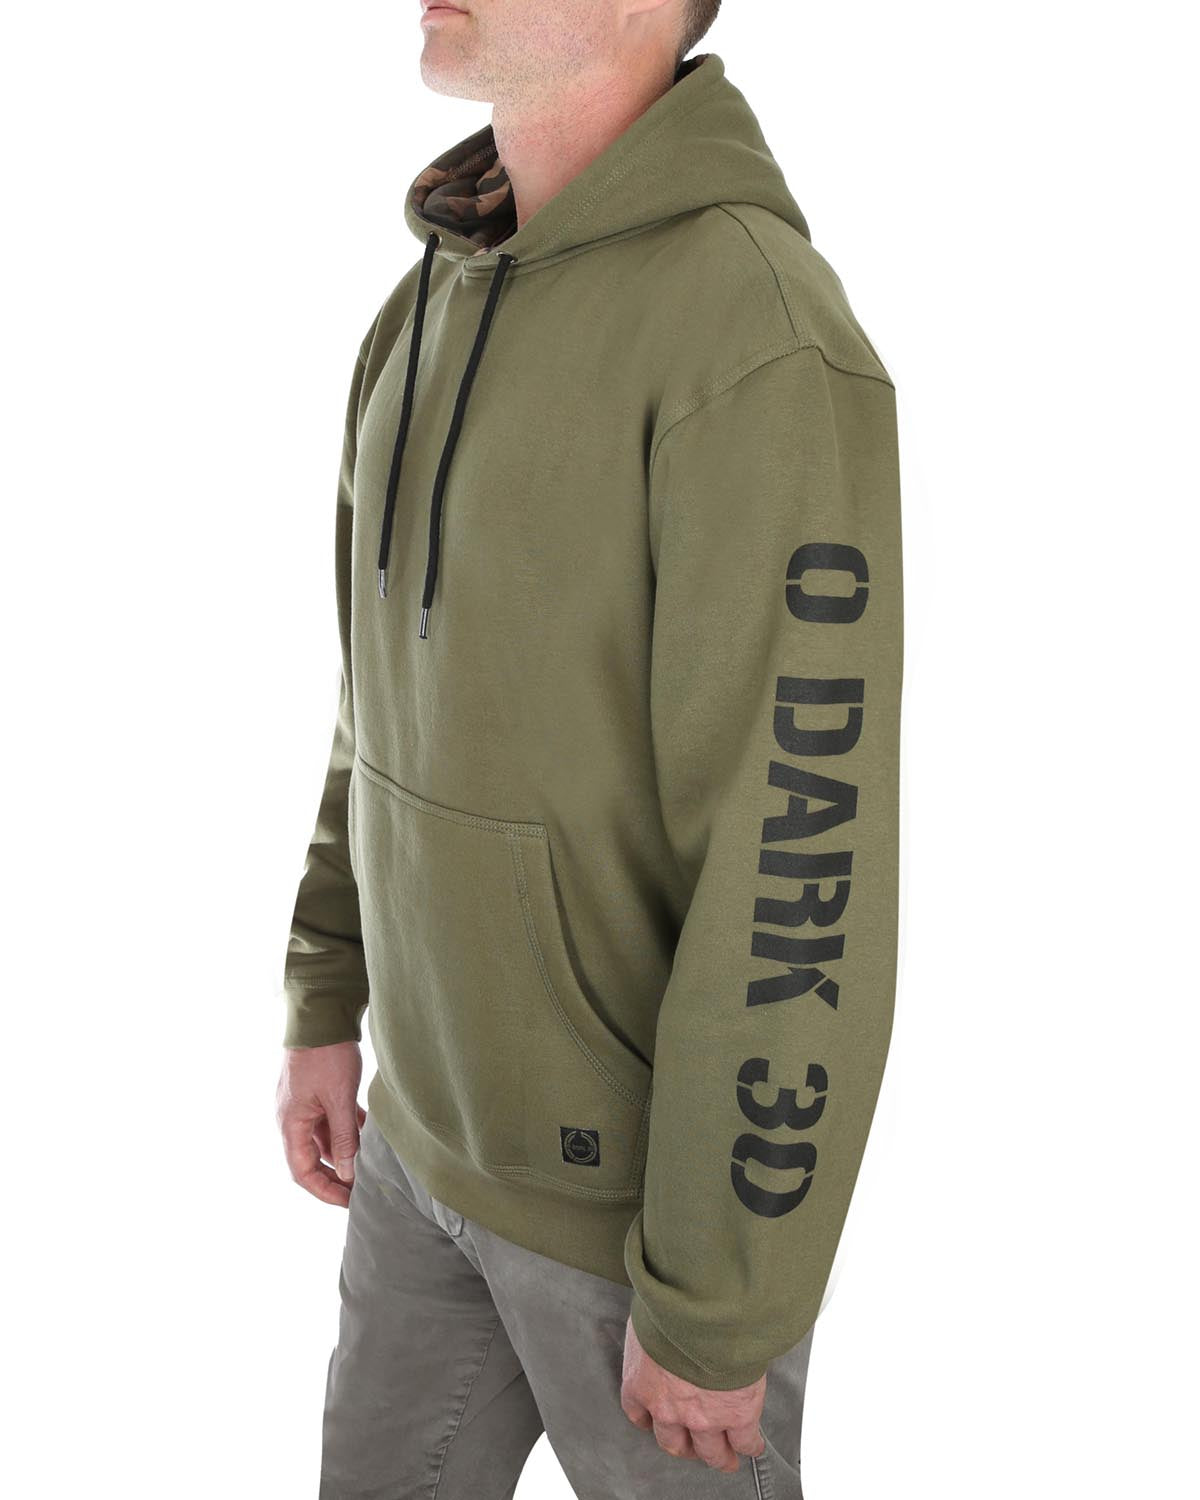 ON THE STREET HOODIE IN ARMY/CAMO